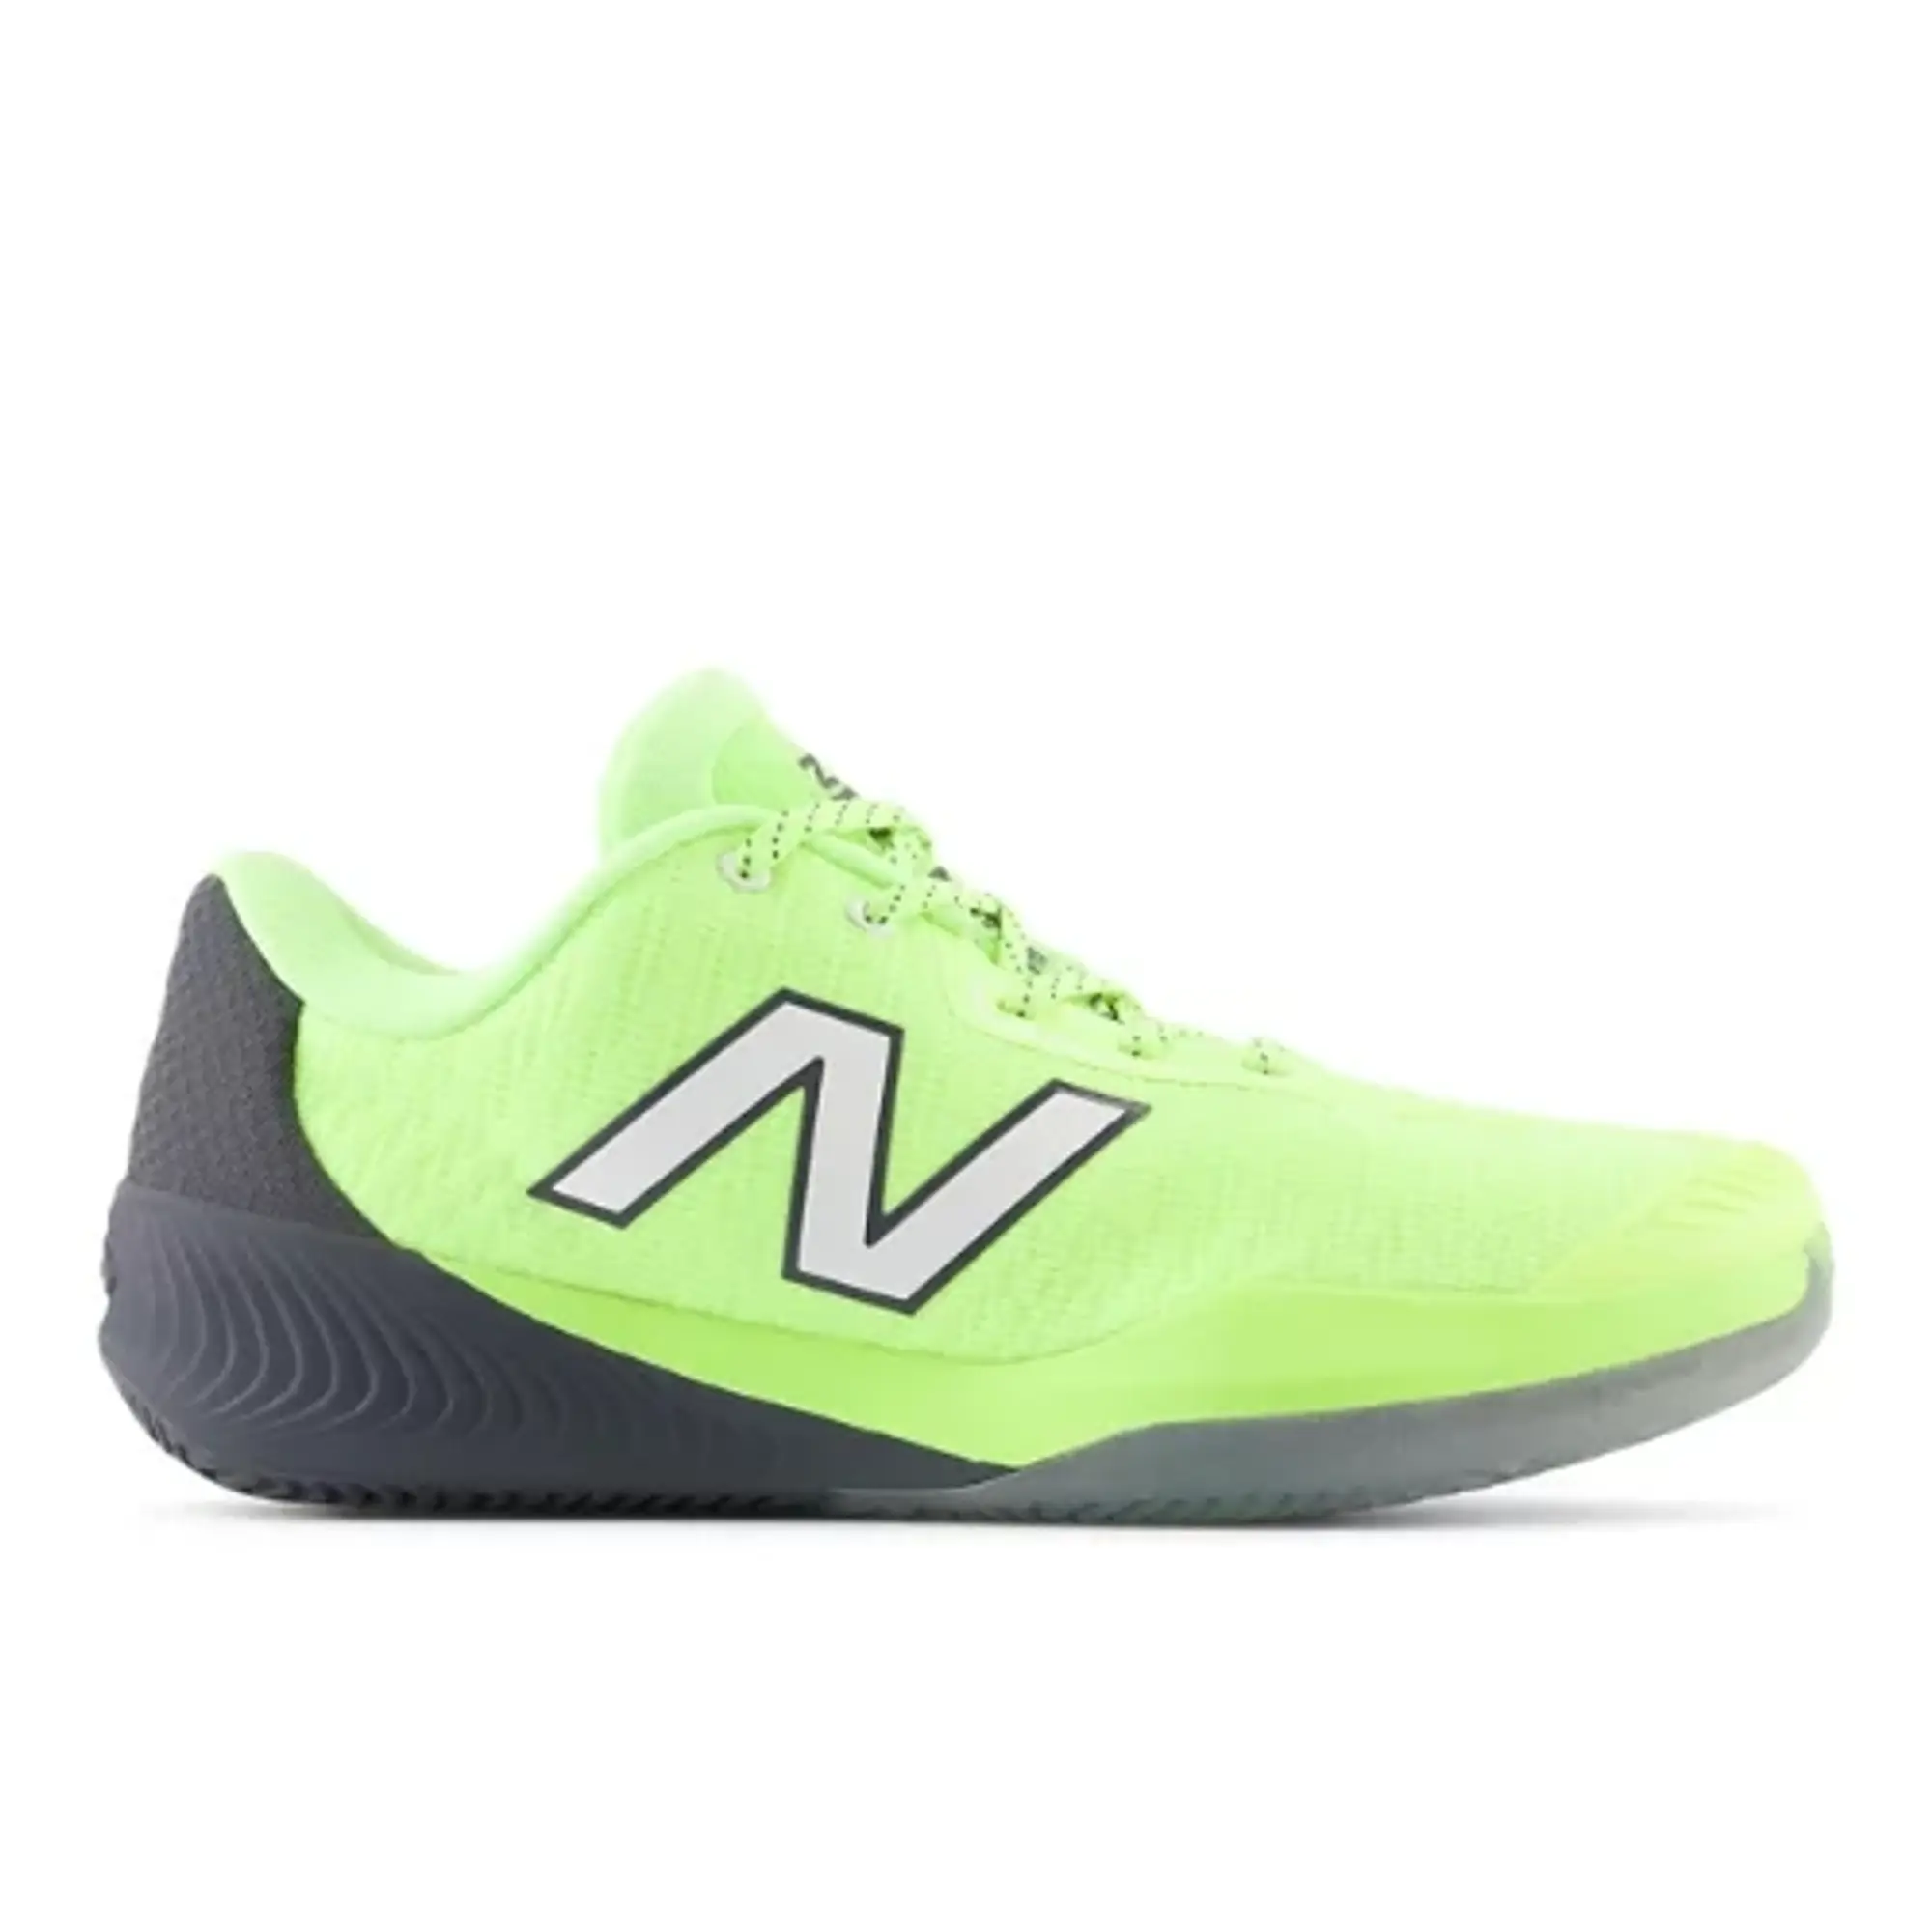 New Balance Men's FuelCell 996v5 Clay in Green/Grey Synthetic